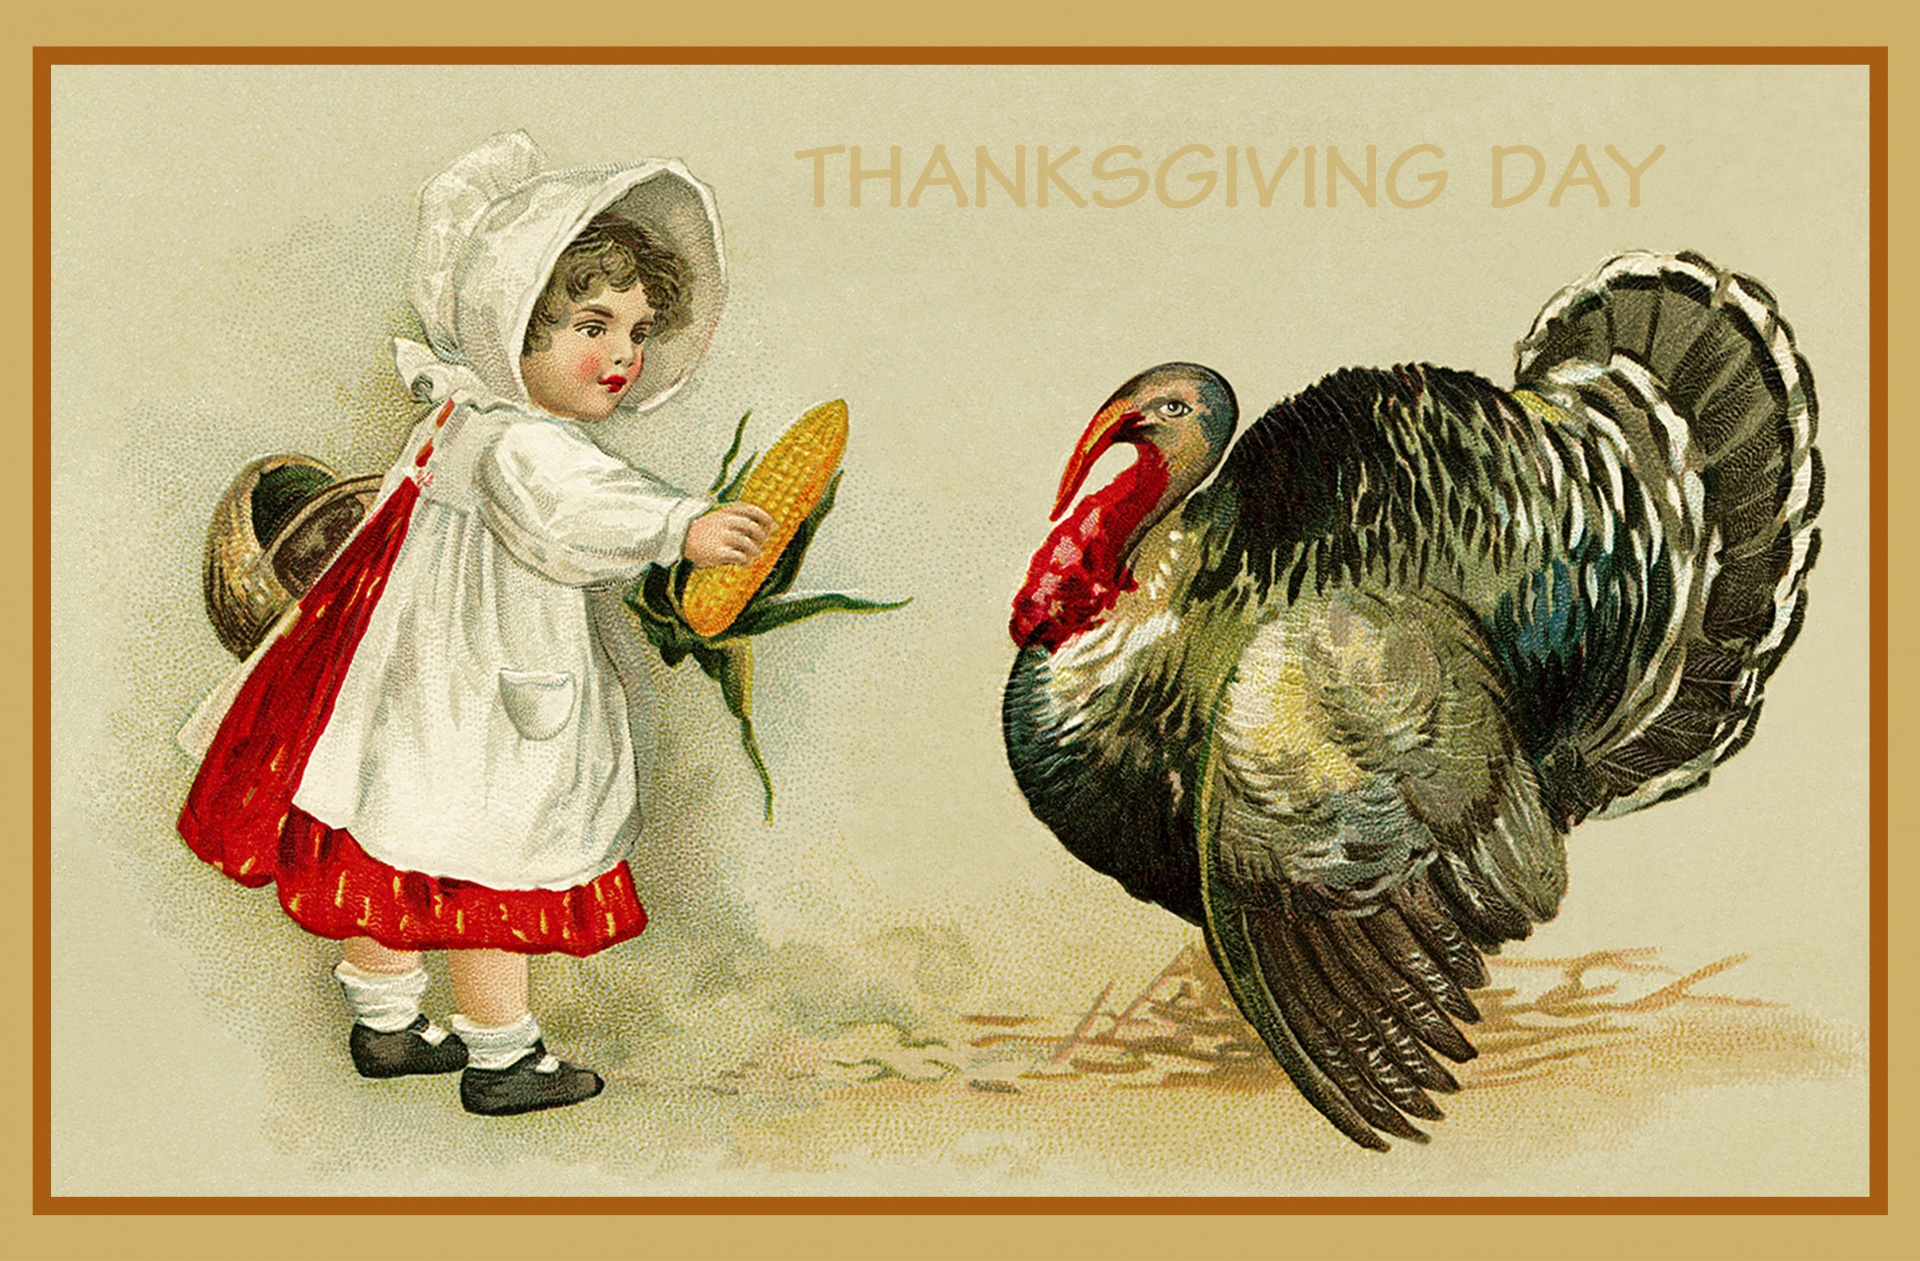 Thanksgiving Day Vintage Card